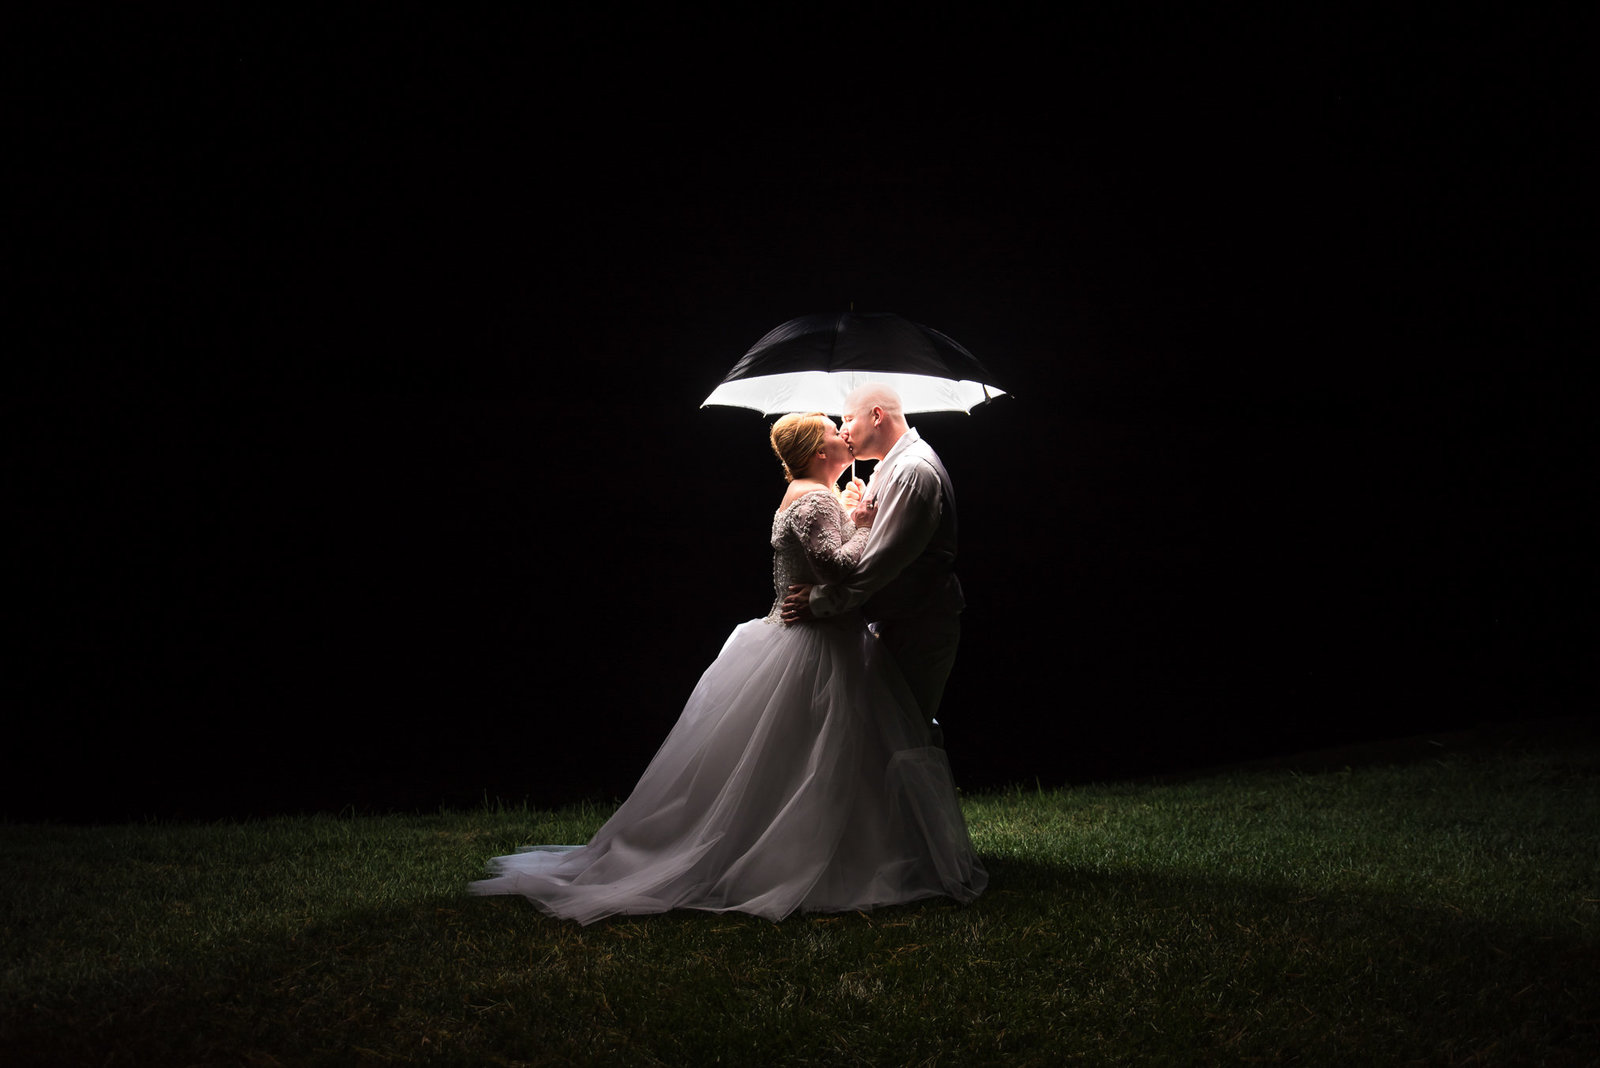 Bride and groom pose for a nightime picture under a lit umbrella